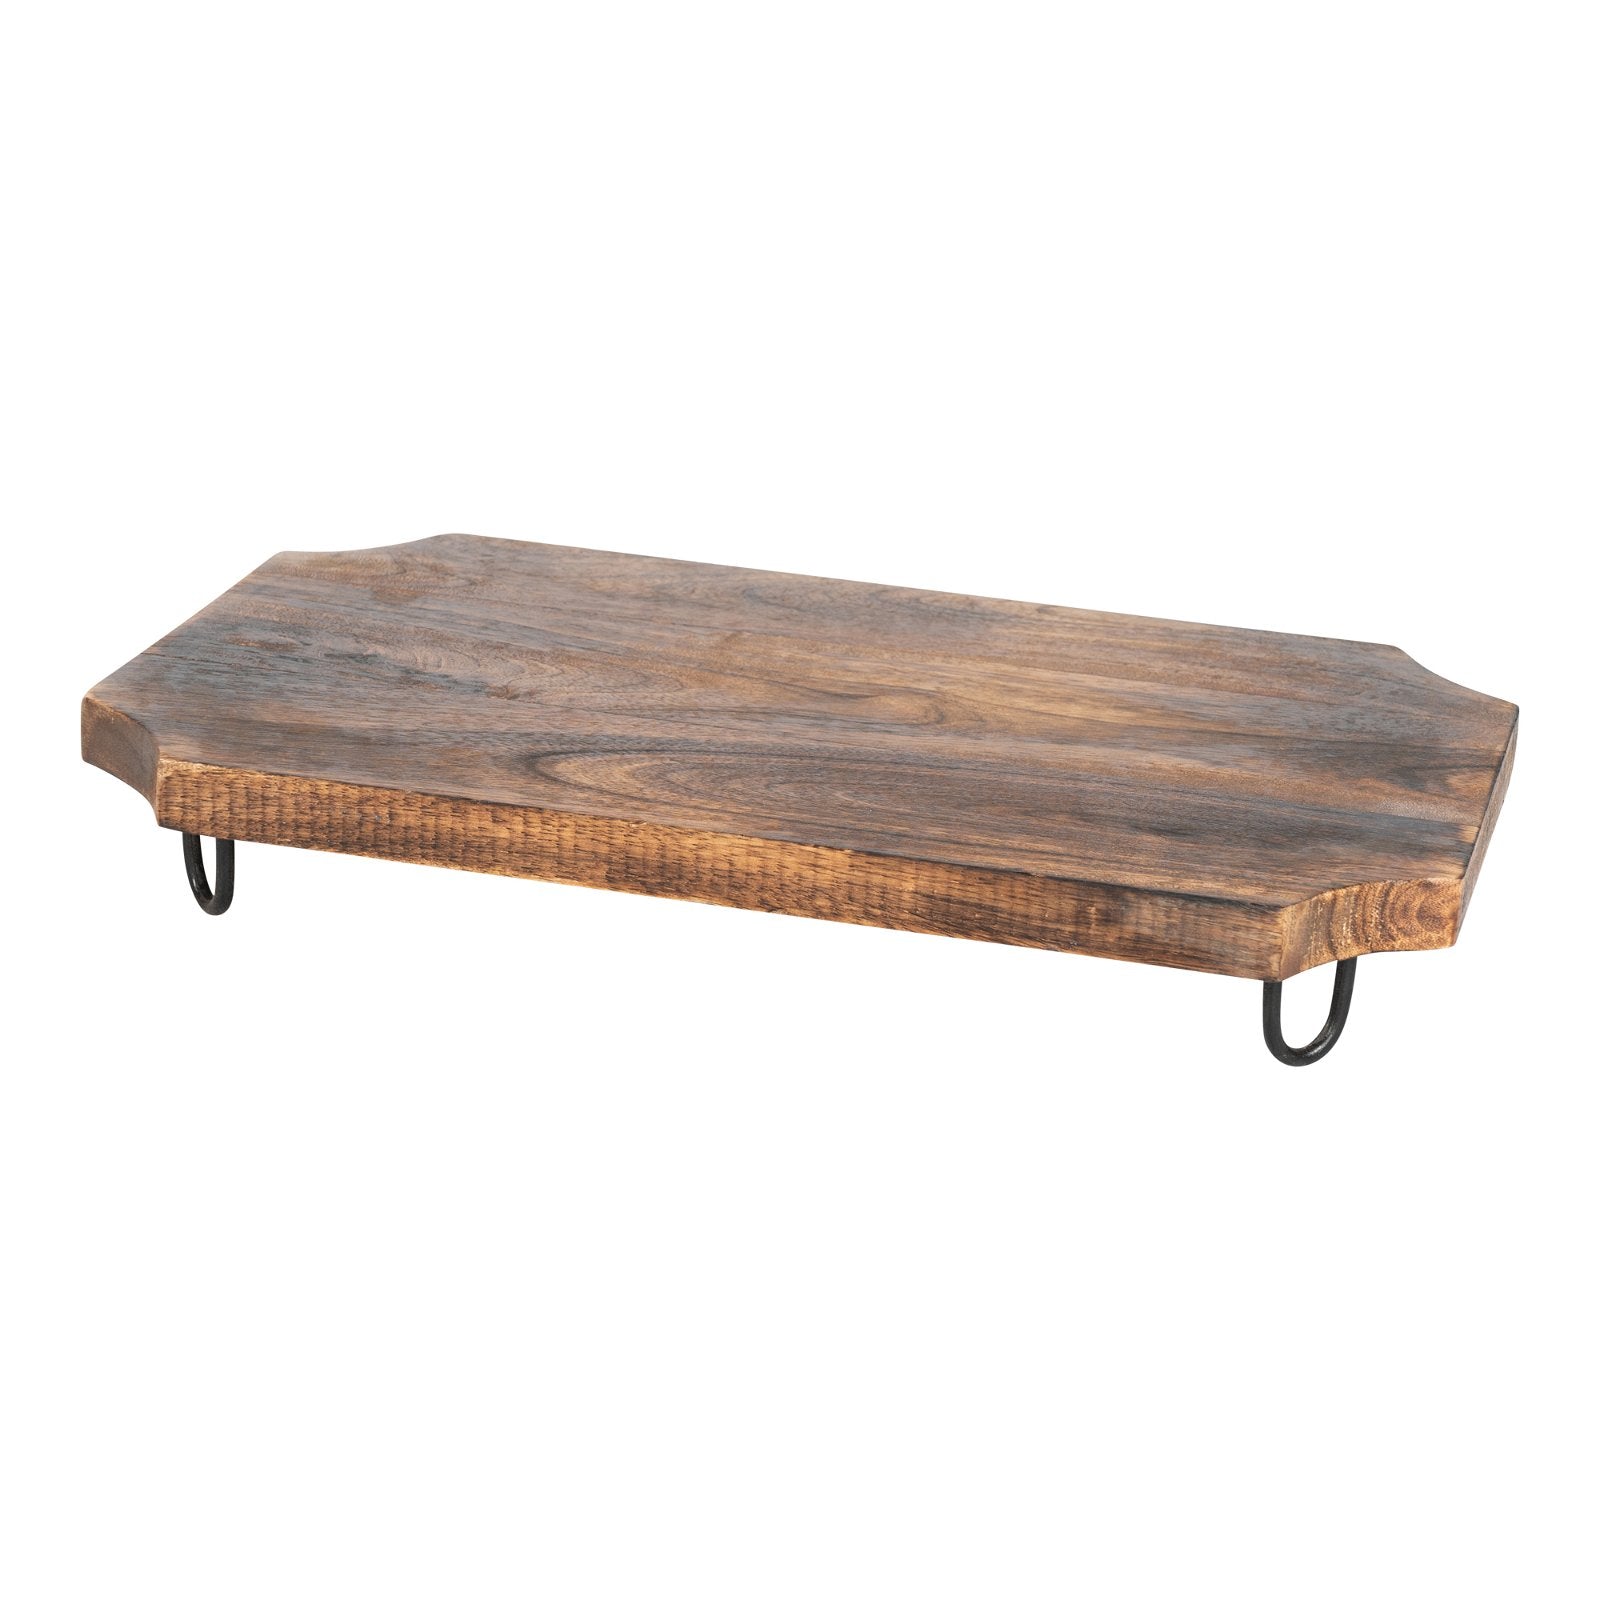 Wooden Distressed Chopping Board On Legs 51cm Willow and Wine